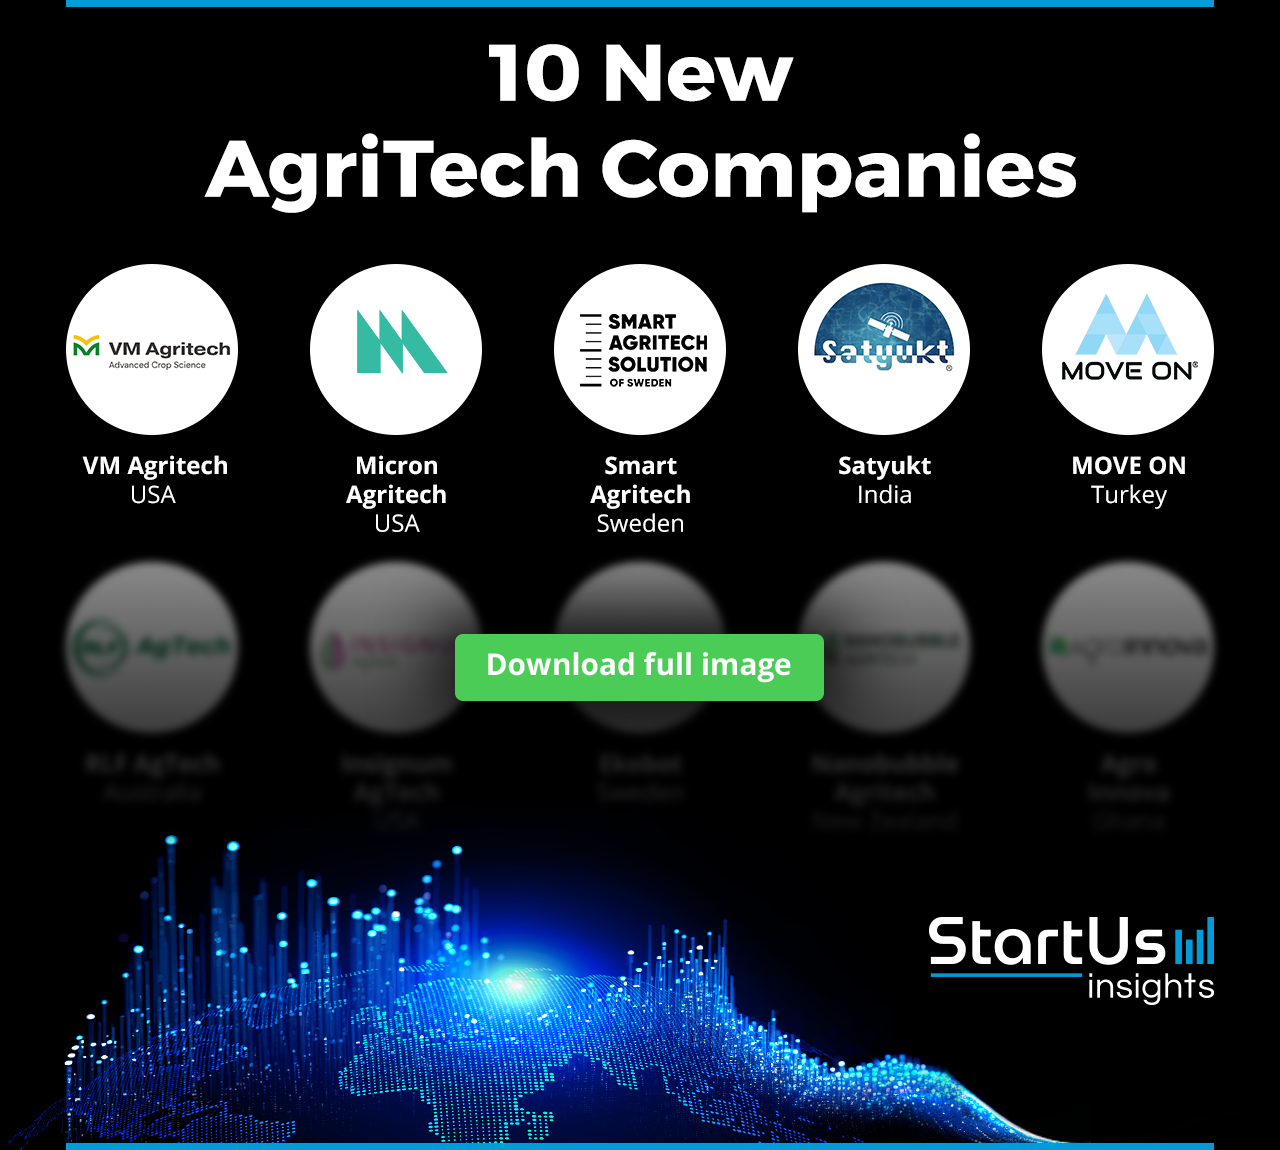 New-AgriTech-Companies-Logos-Blurred-StartUs-Insights-noresize